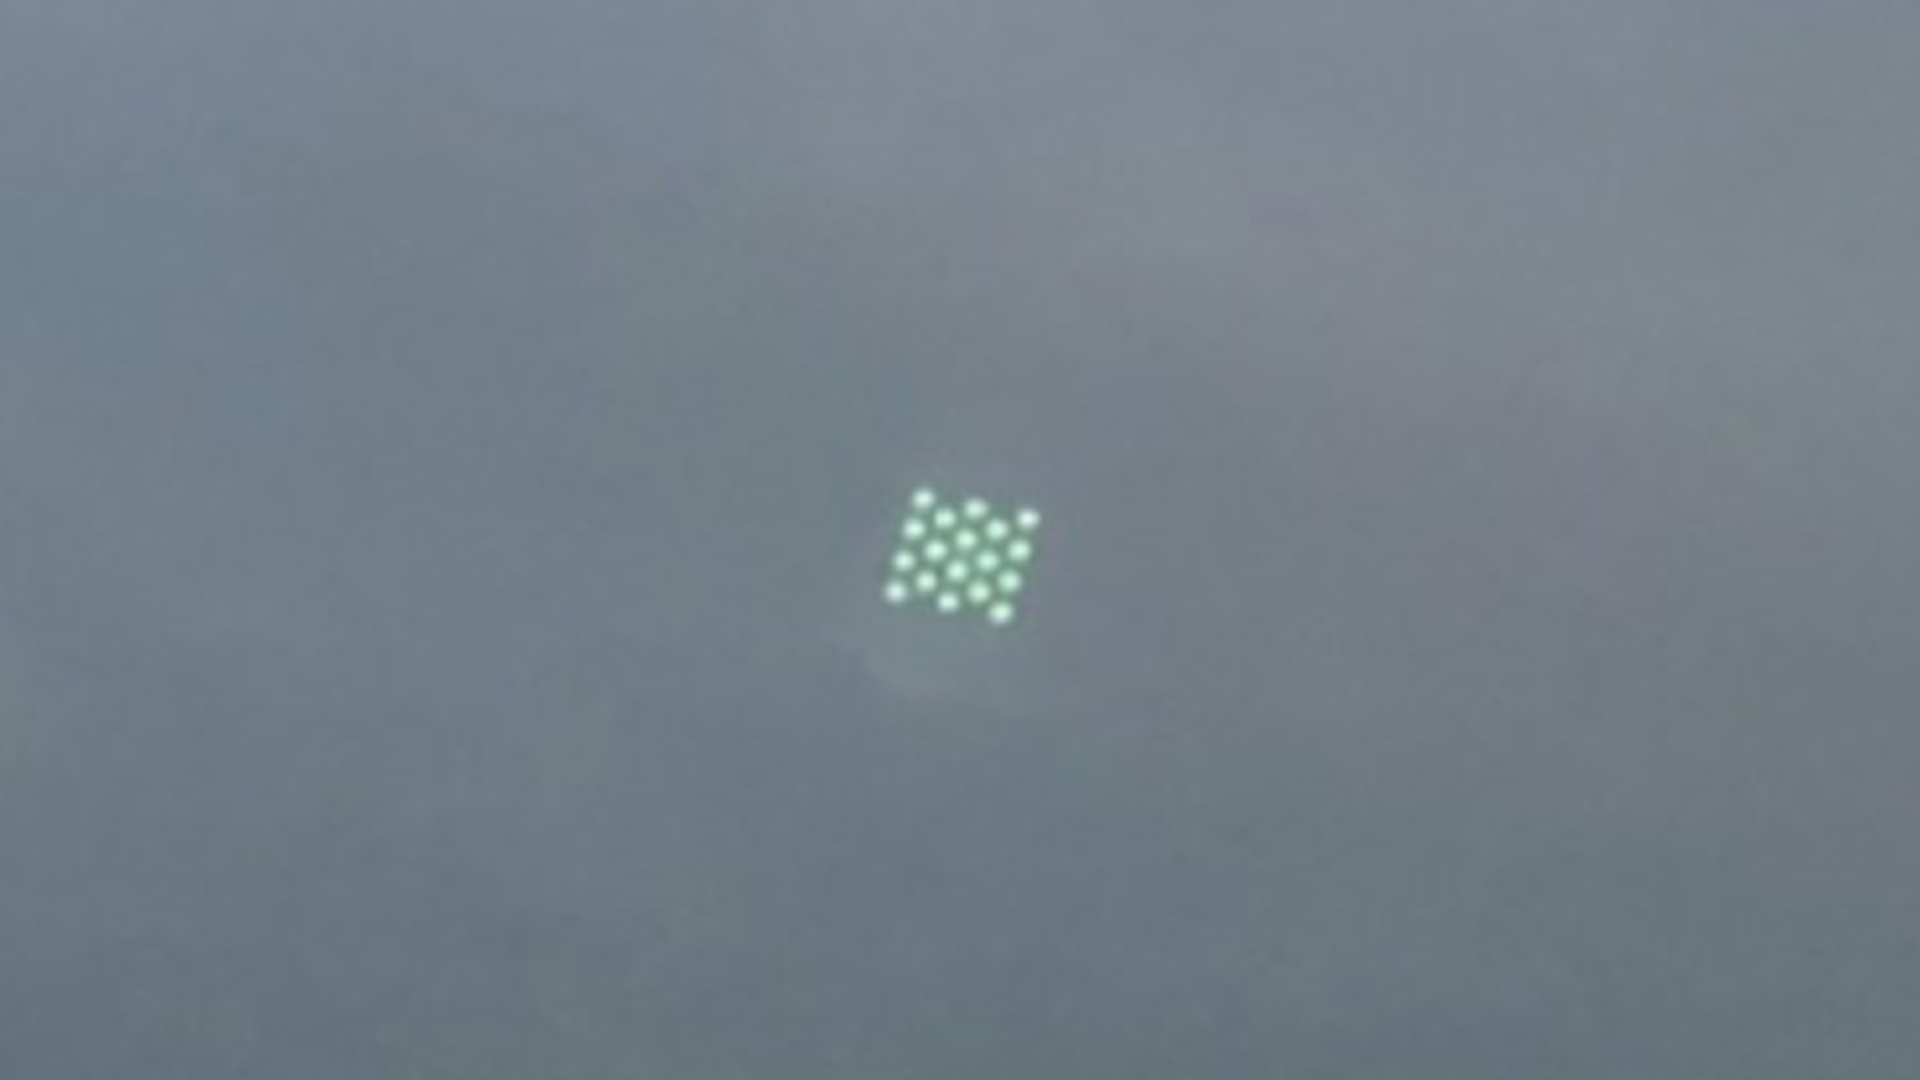 Mysterious Green ‘Grid of Dots’ in the Sky Finally Revealed by Clever iPhone Users – Uncover the Truth Behind the Eerie Photo!